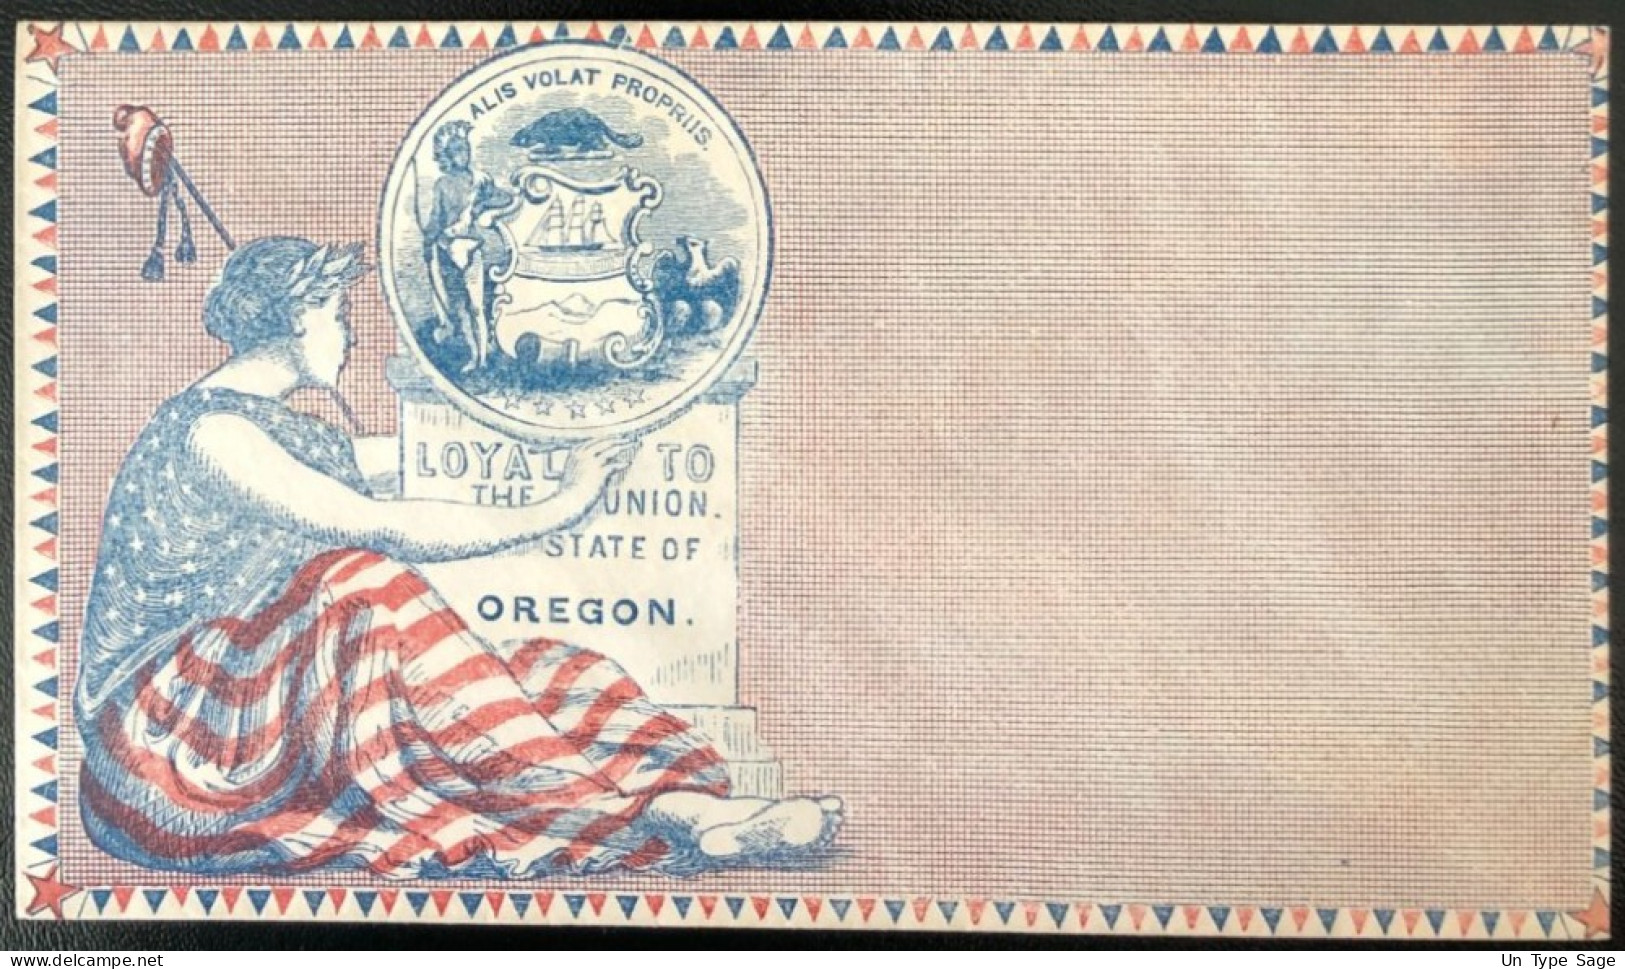 U.S.A, Civil War, Patriotic Cover - "Loyal To The Union. State Of OREGON" - Unused - (C455) - Marcophilie